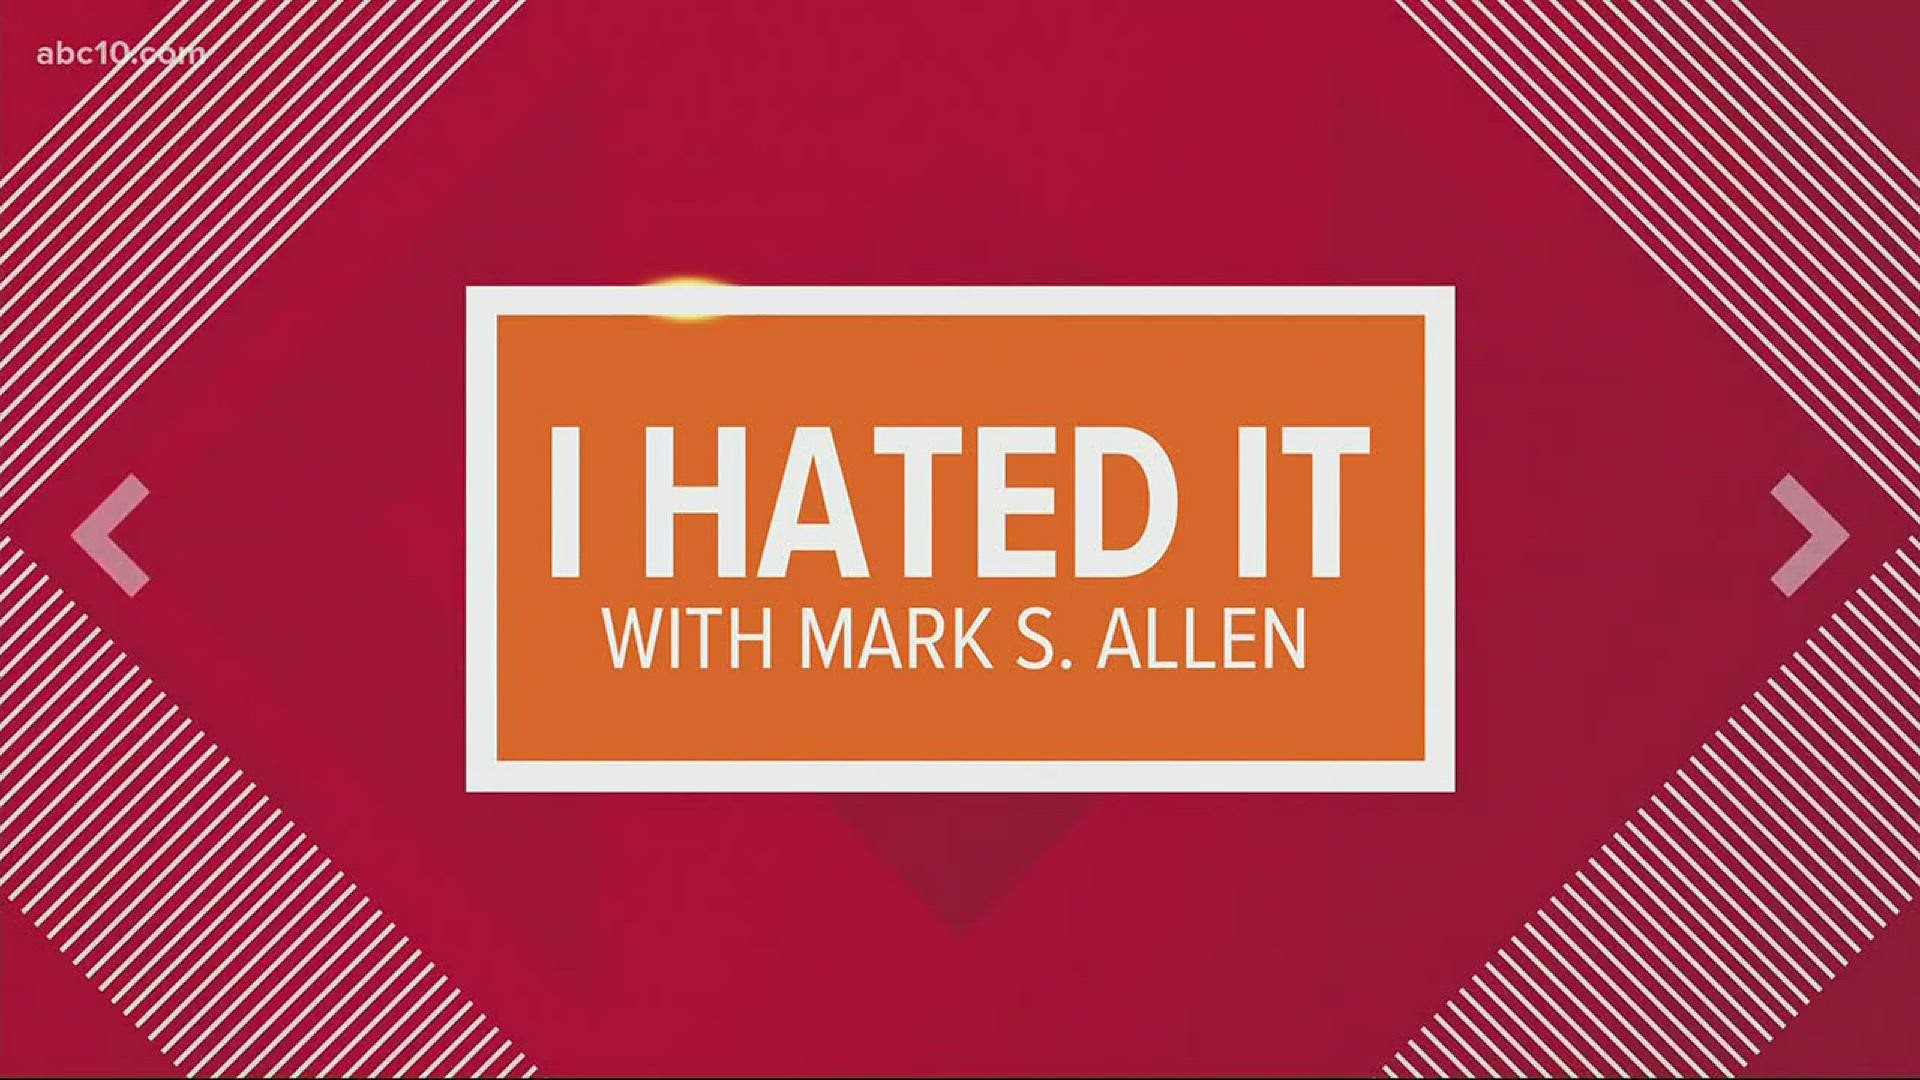 It seems like Mark S. Allen loves just about every movie he watches. That's why he recommends so many. But not everyone agrees with him. That's why we bring you "I hated it."